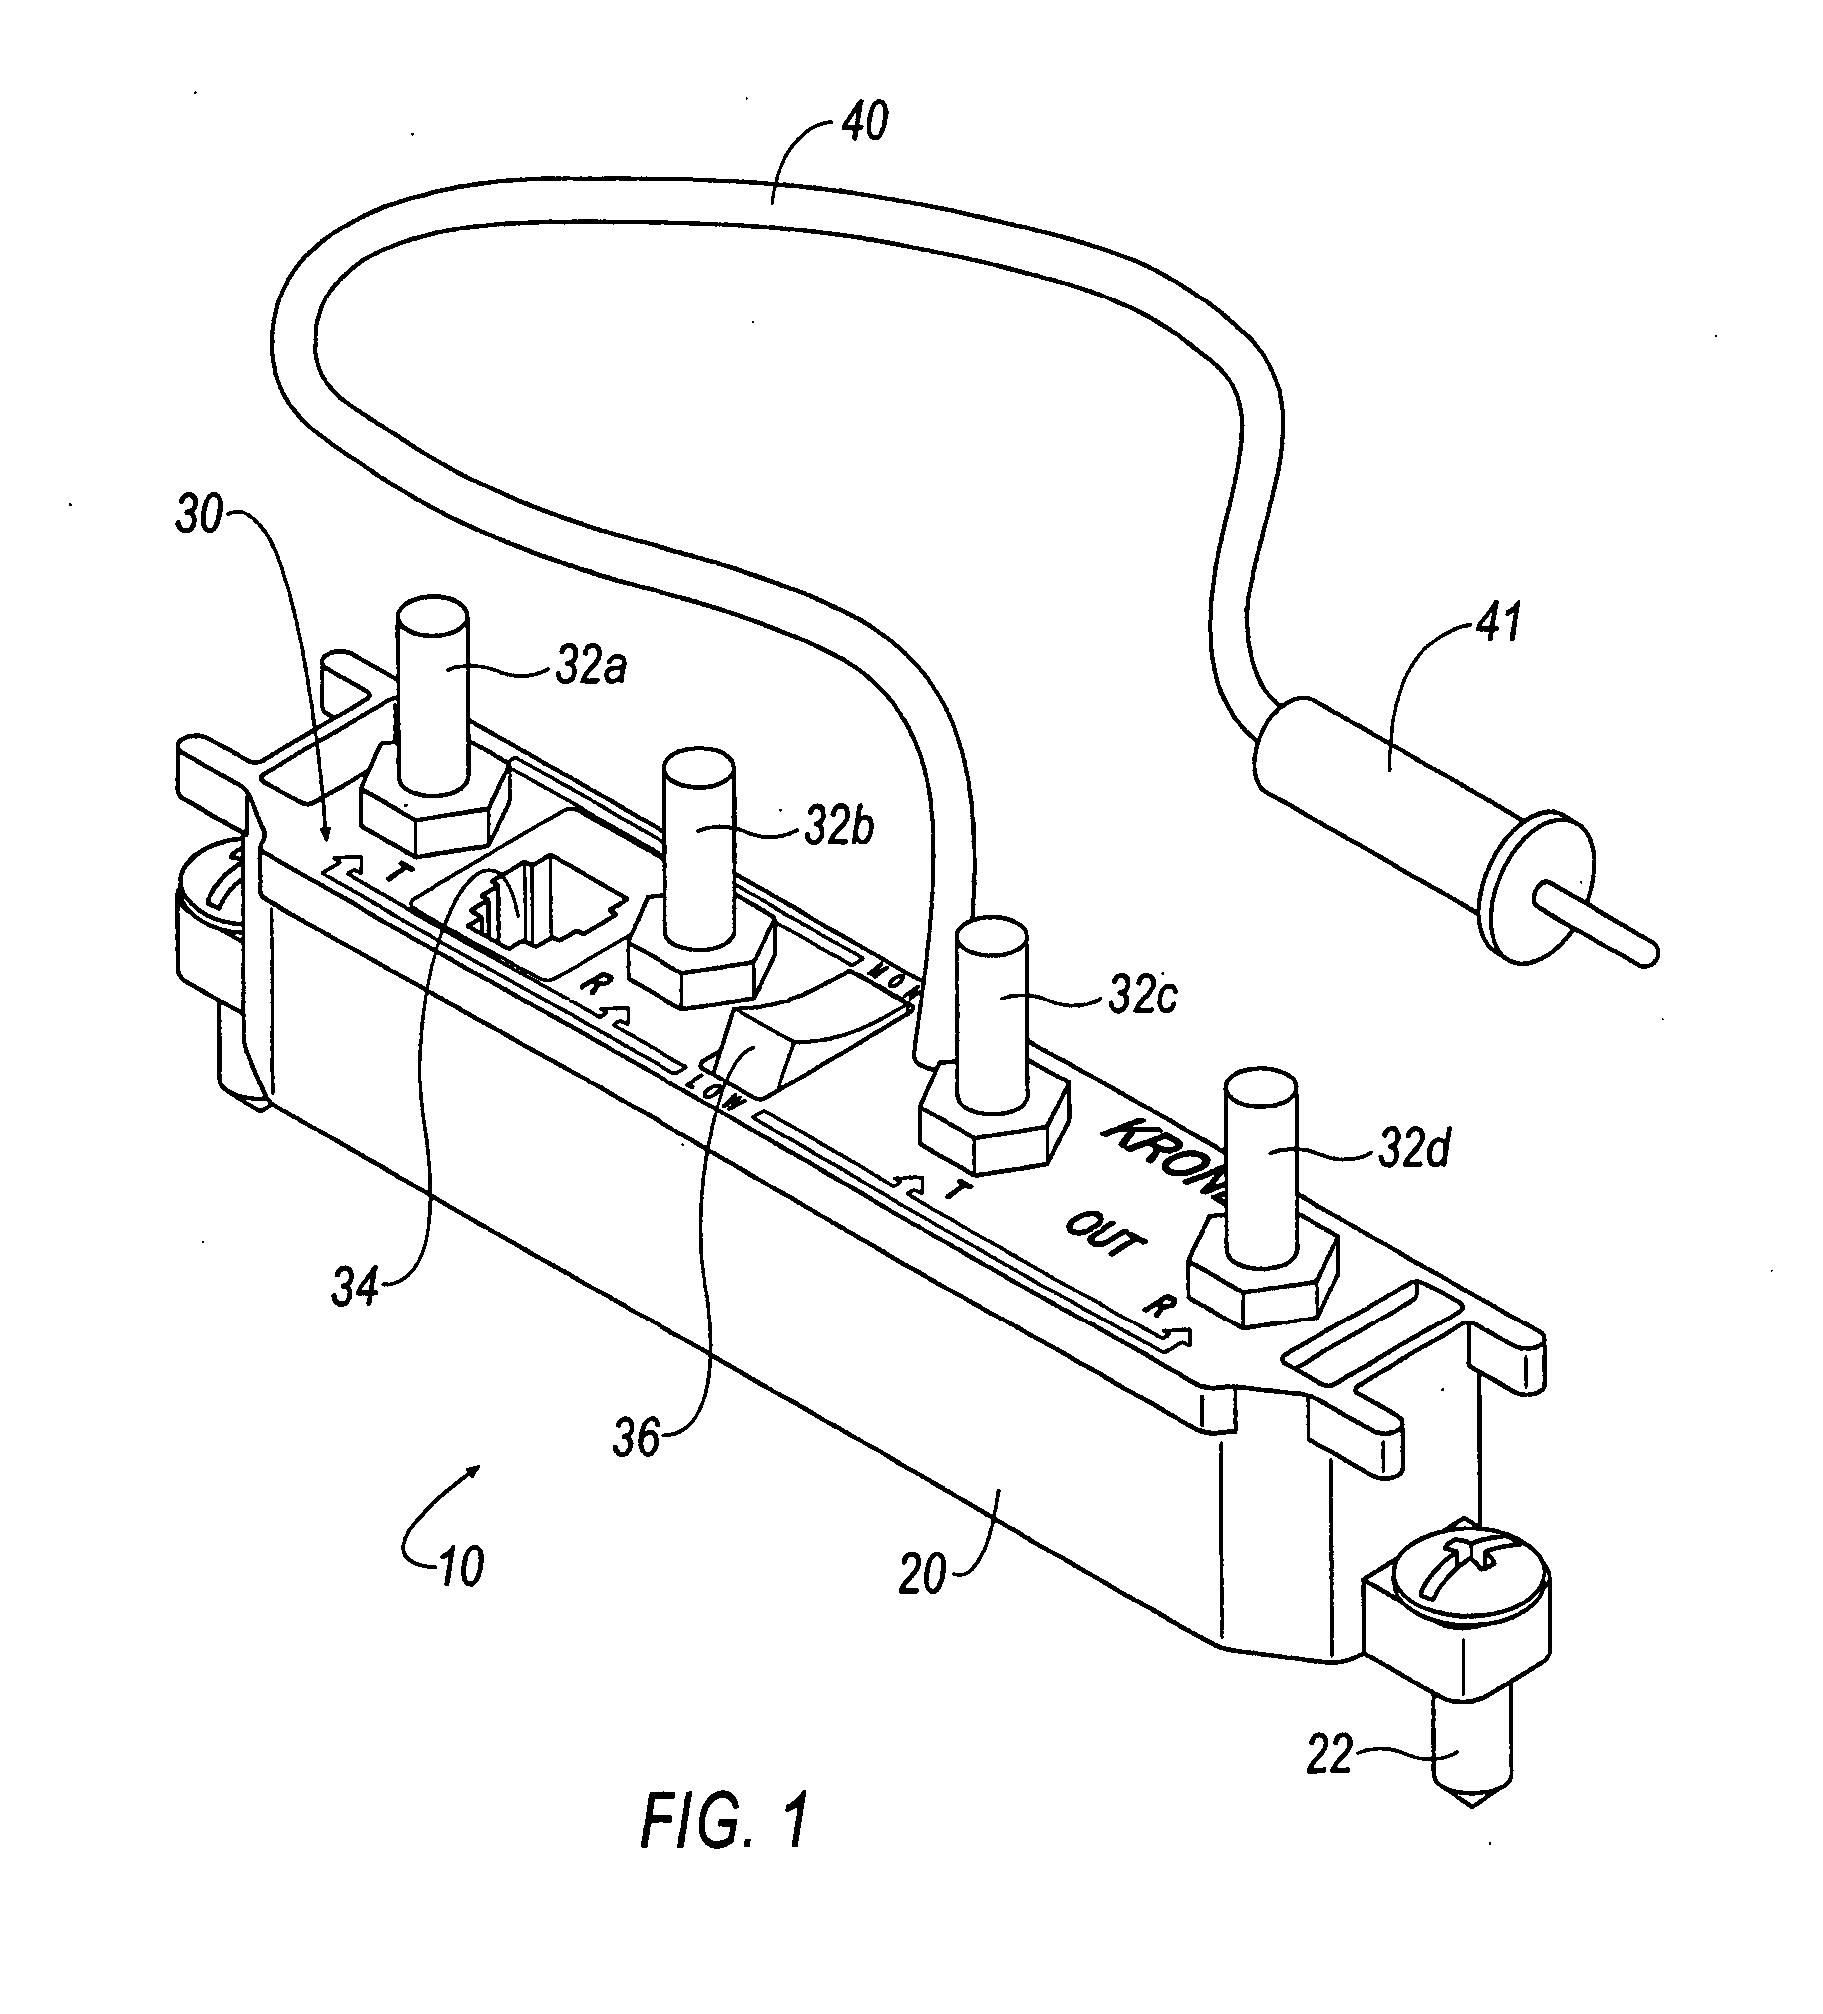 Interface device for testing a telecommunication circuit